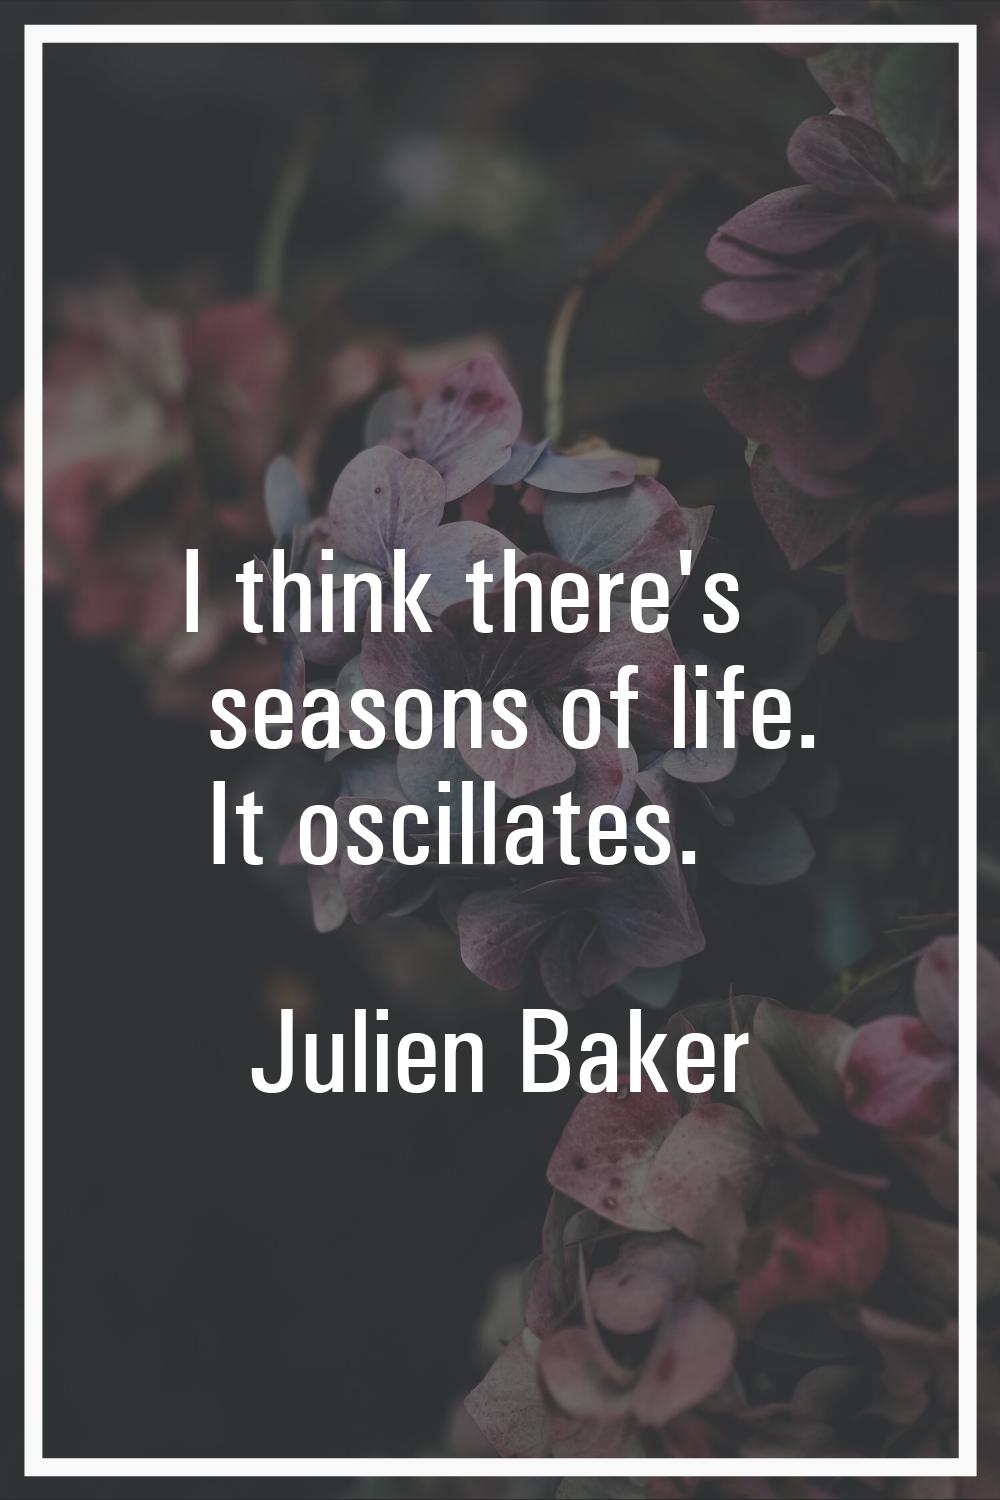 I think there's seasons of life. It oscillates.